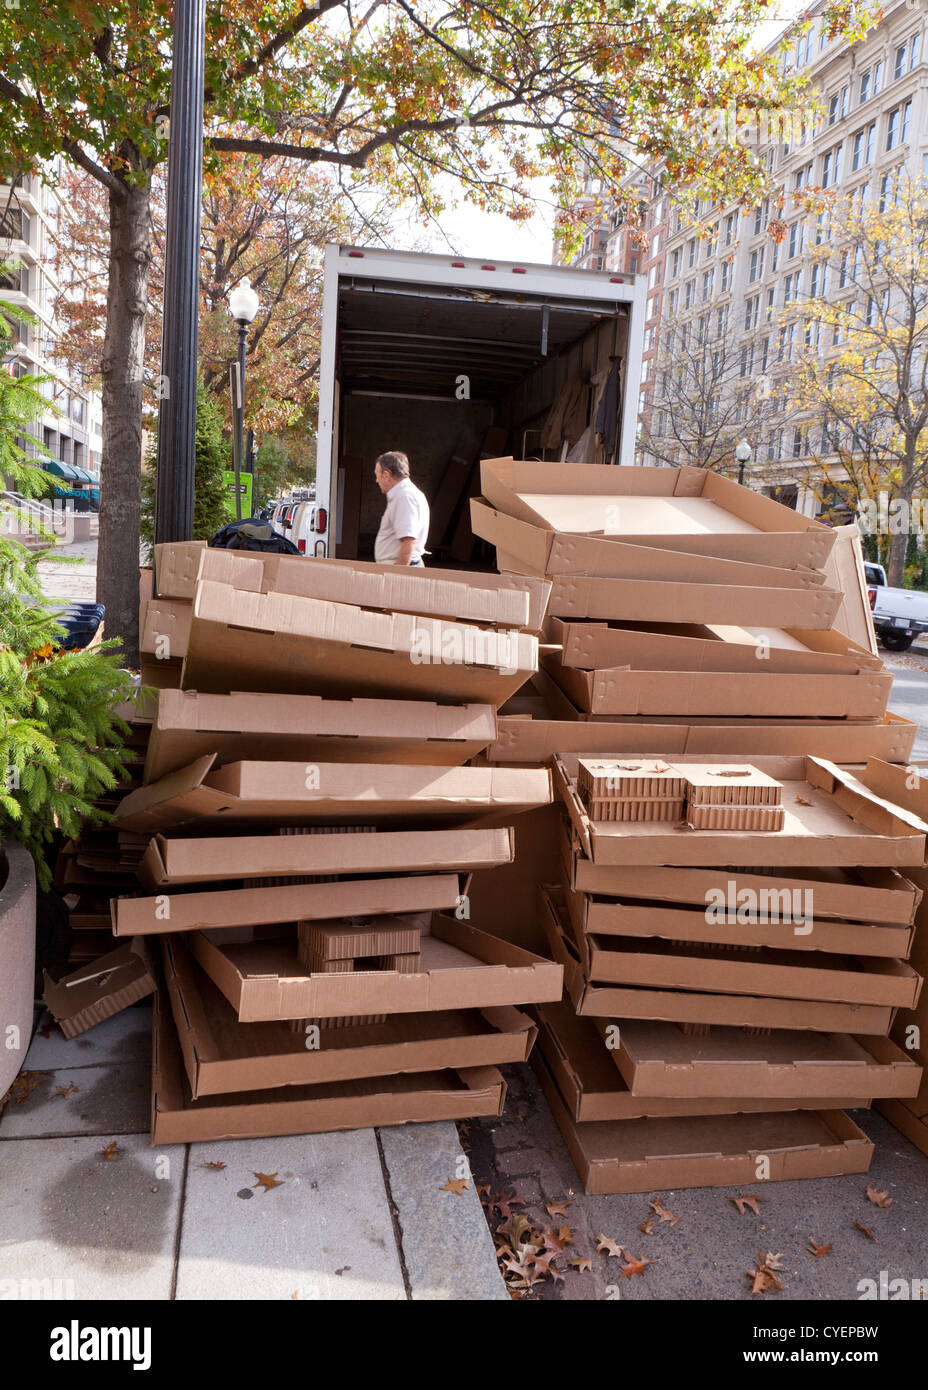 Empty cardboard boxes stacked behind moving truck Stock Photo